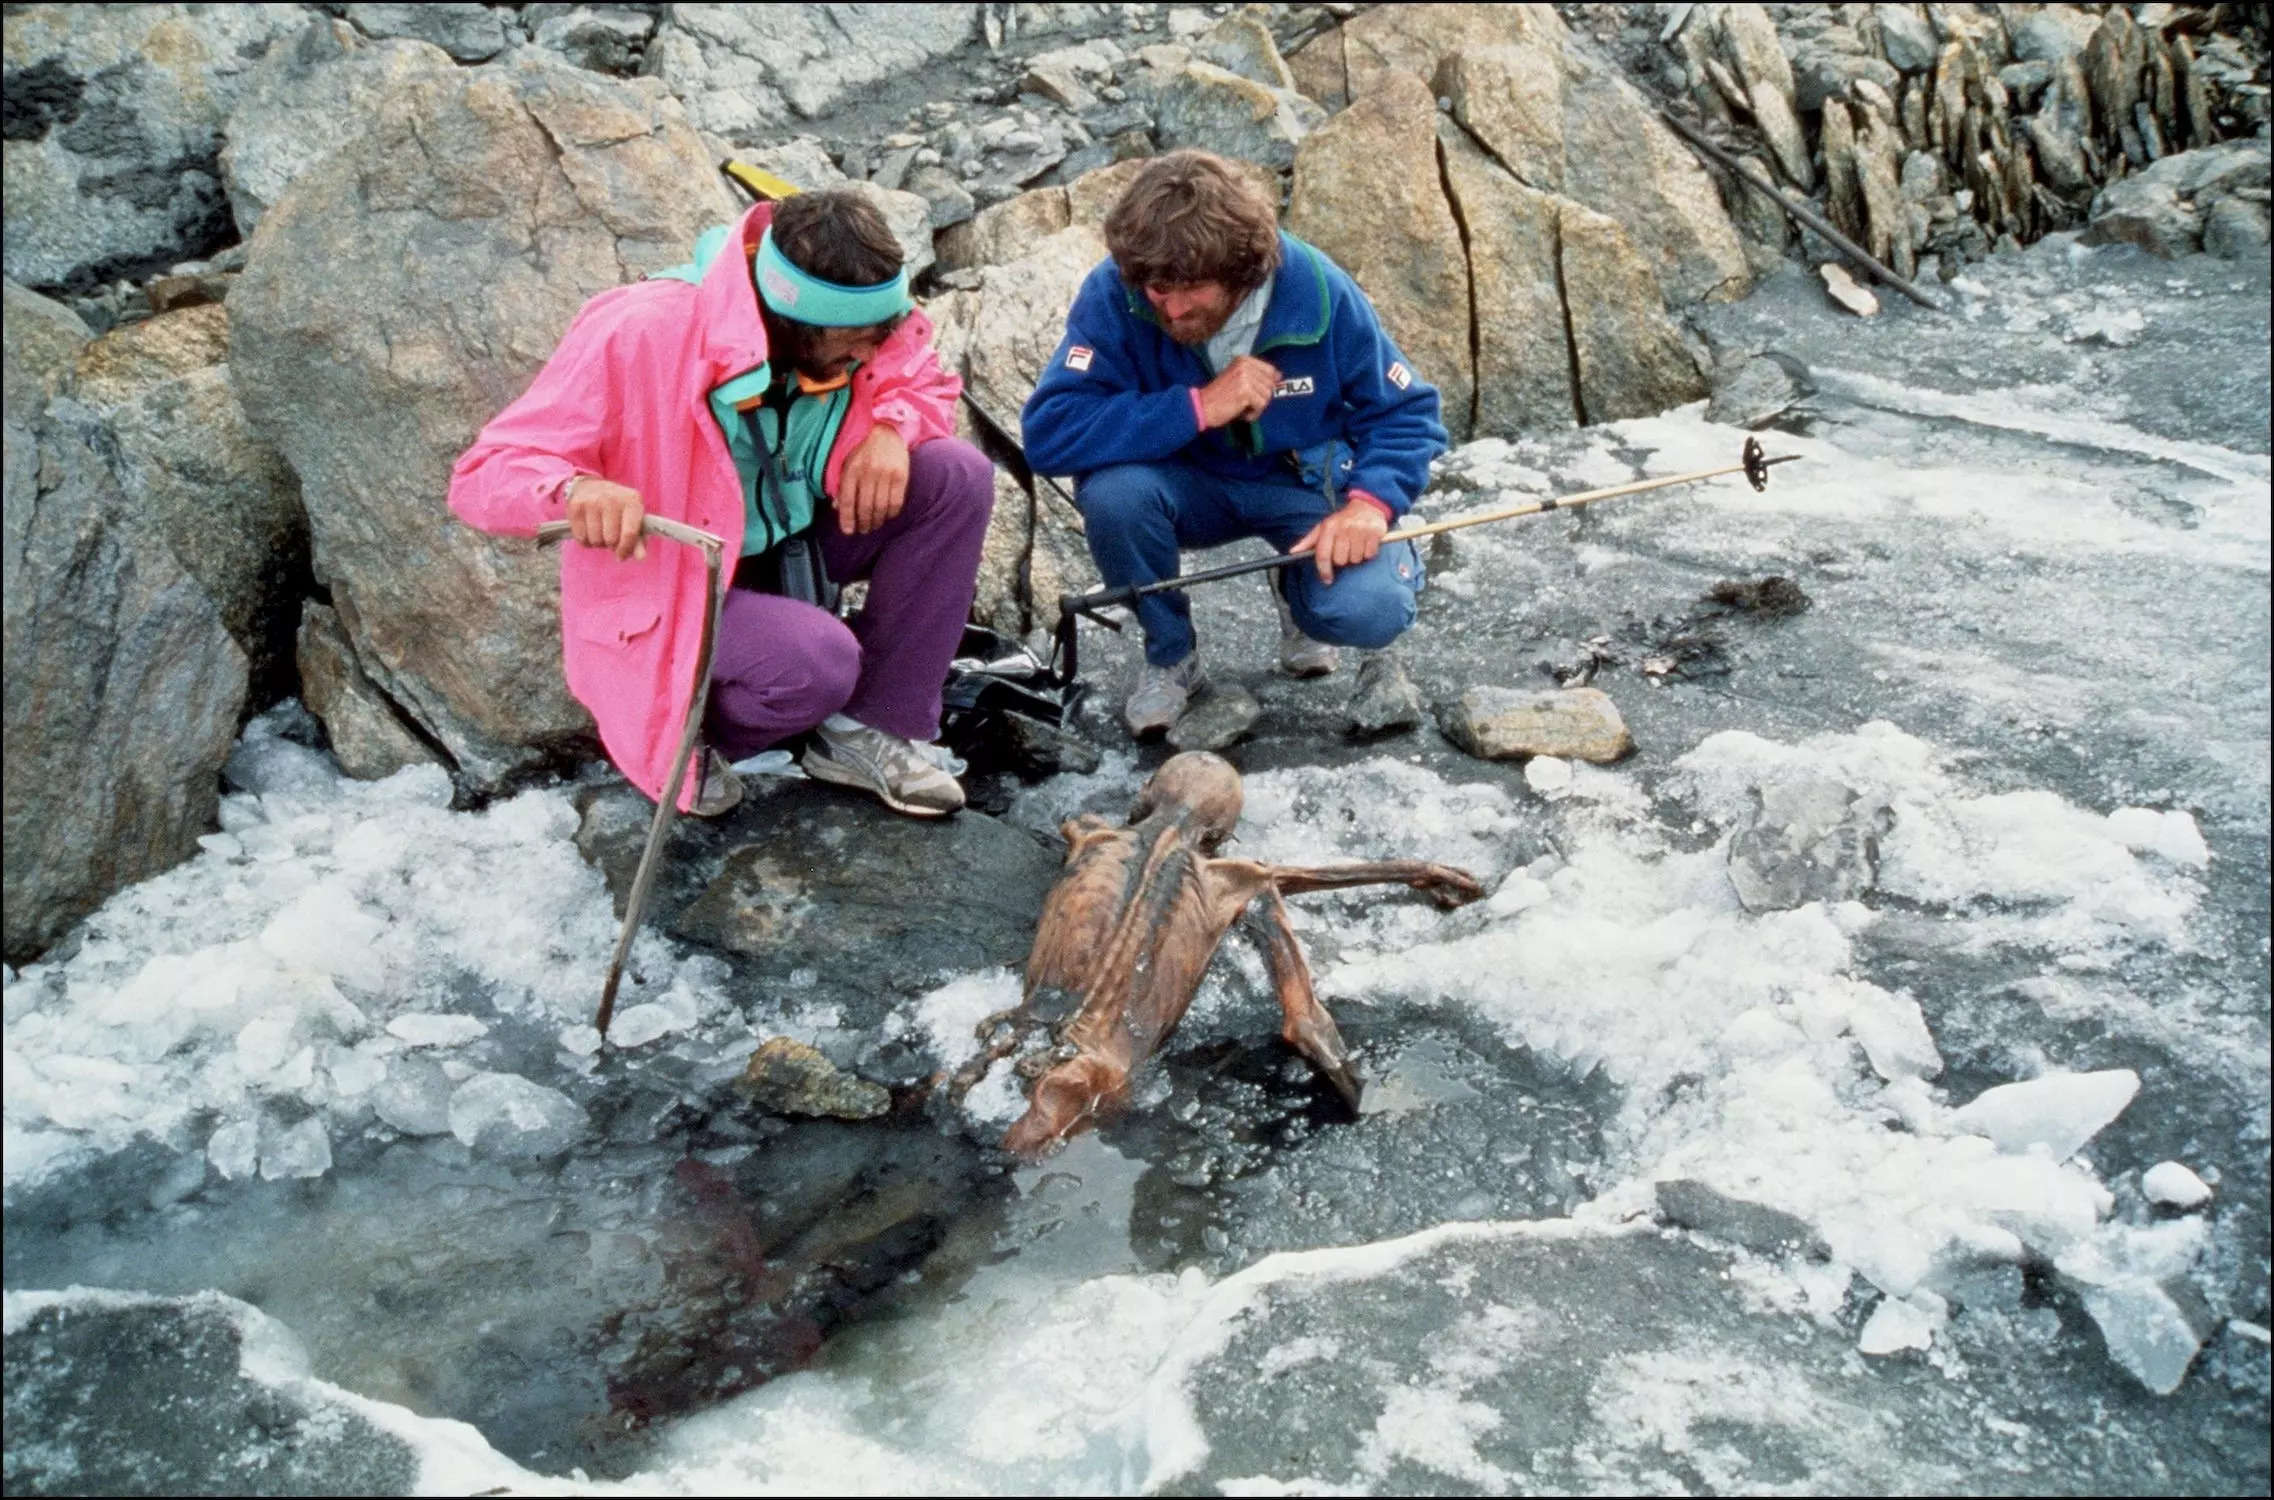 two men with shaggy hair in 90s hiking clothes crough on melty ice beside a facedown mummy positioned as if it